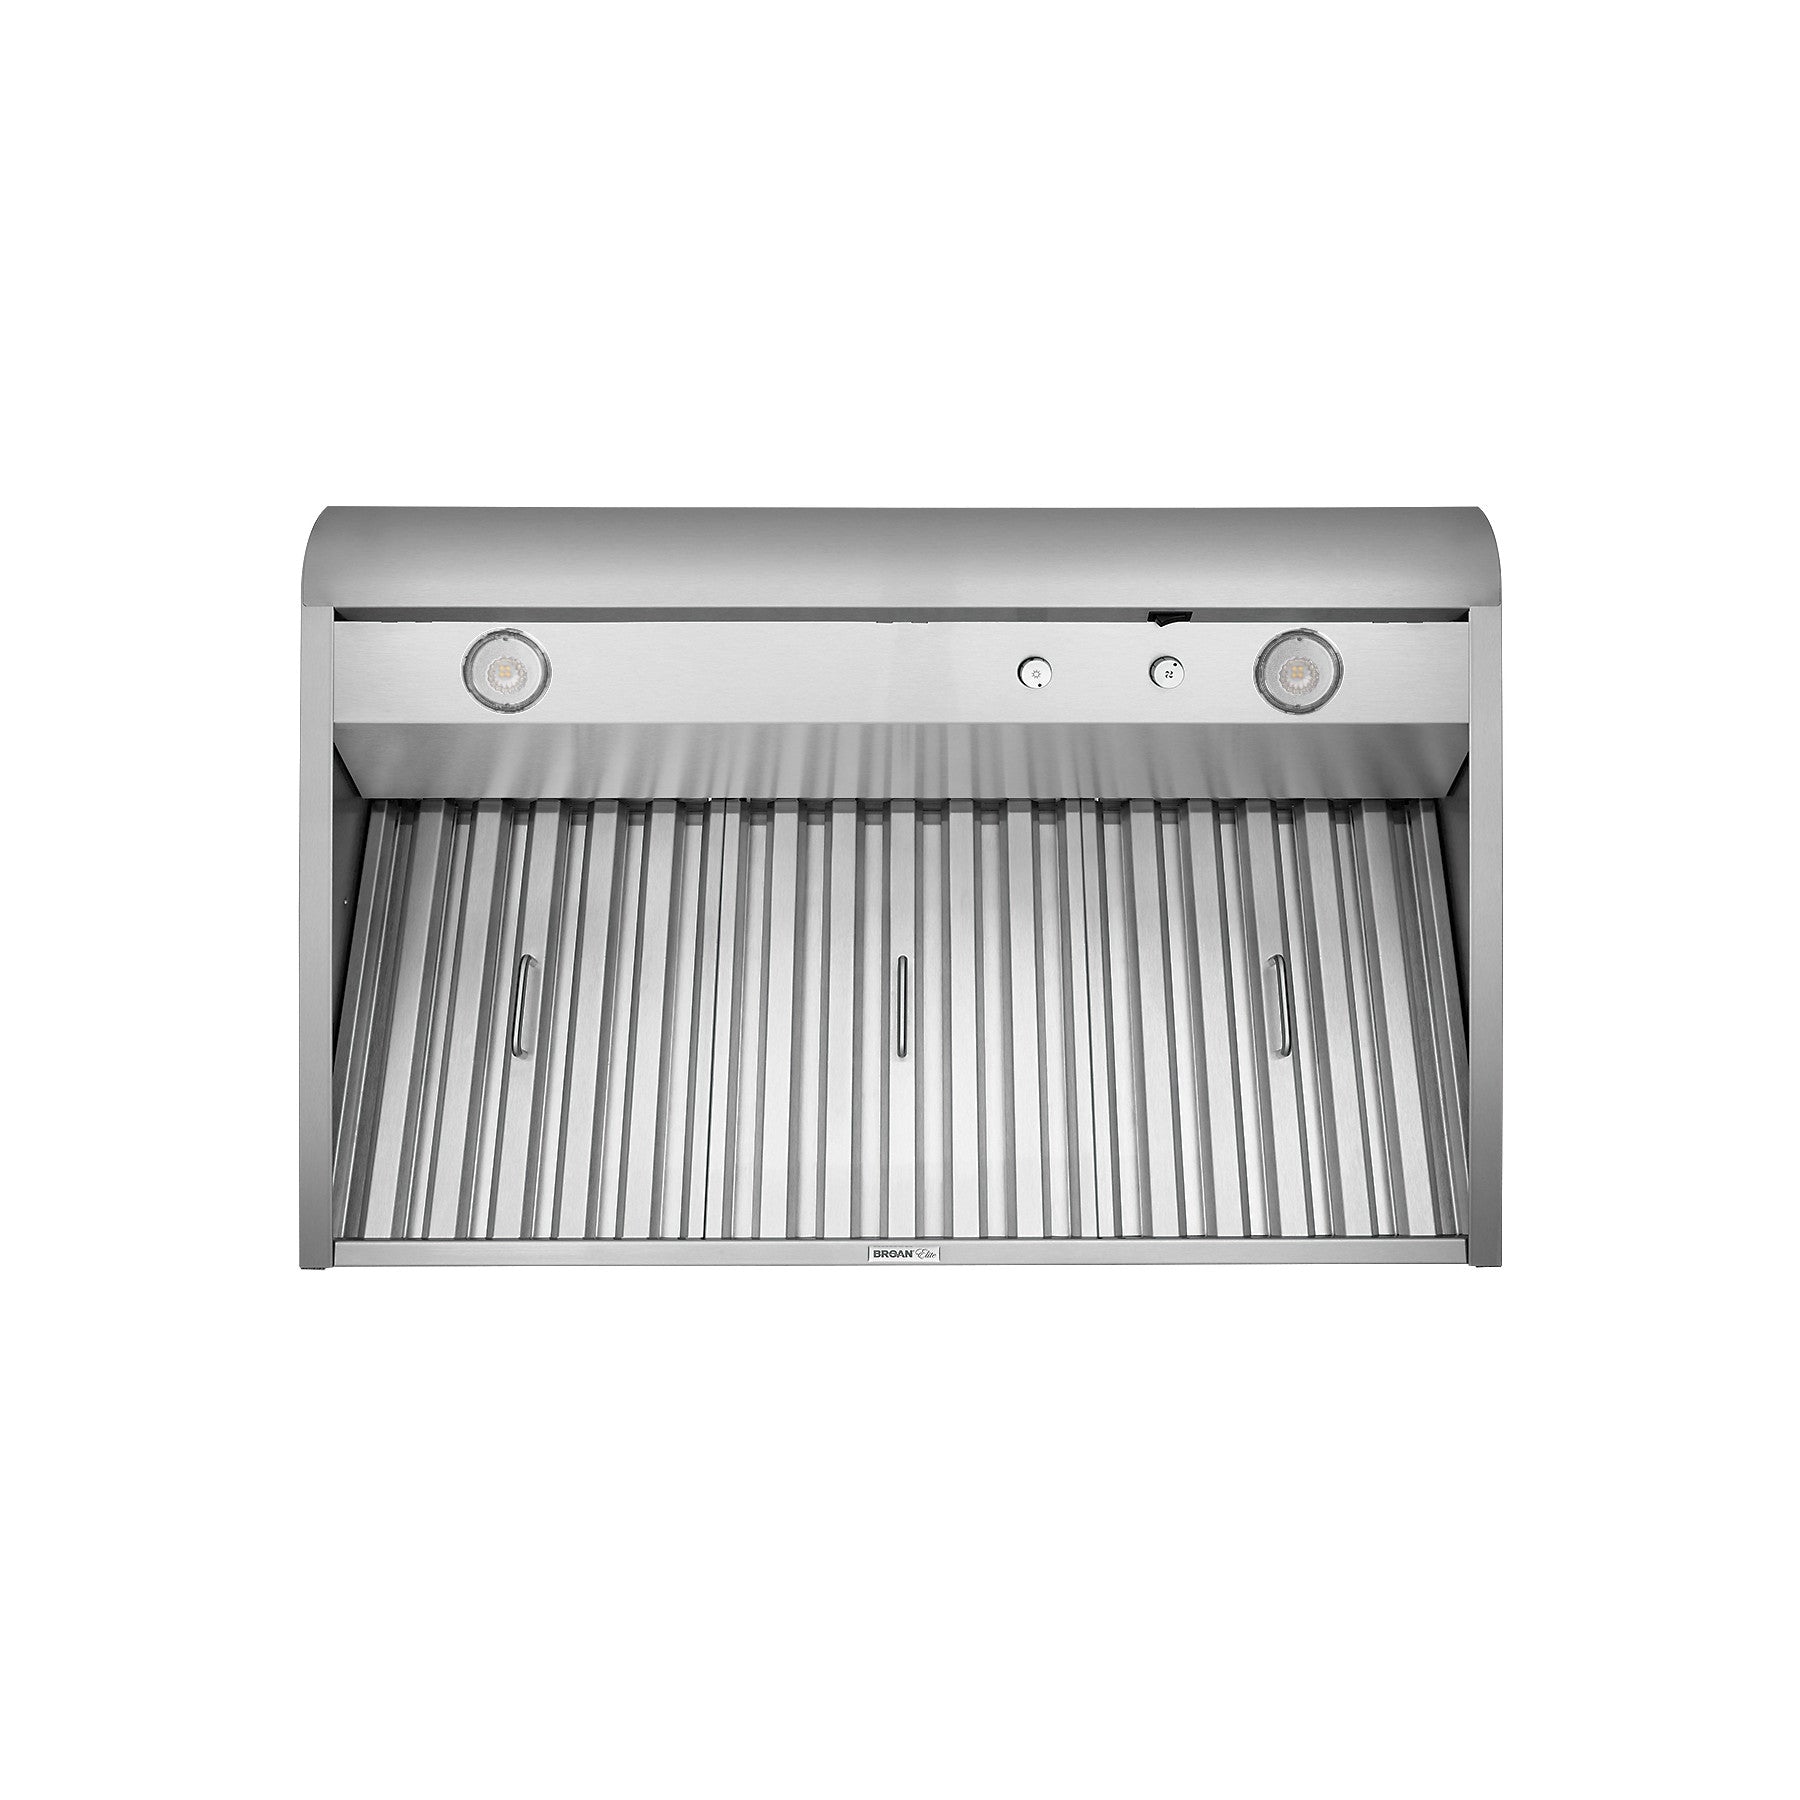 Broan - 30 Inch Under Cabinet Range Vent in Stainless - E64E30SSLC